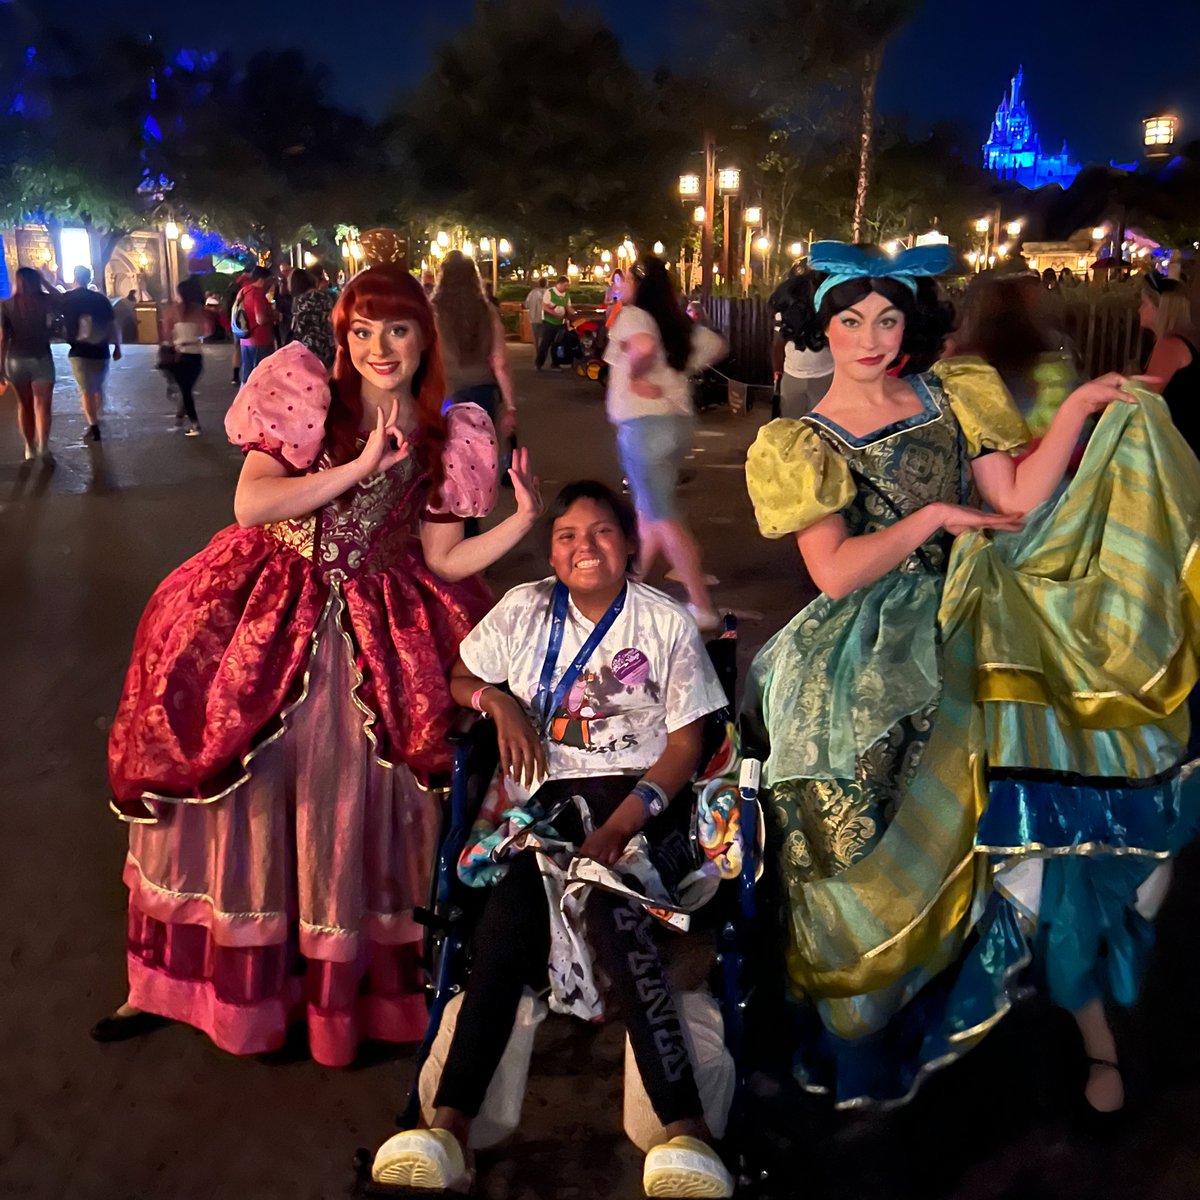 When thinking about her Wish, Hannah wanted something magical.✨ And Hannah's Wish Trip to Disney World left her with a sparkle in her eye and the biggest smile on her face! Thank you to all who make joy like this possible for local children like Hannah! #WishGrantedWednesday